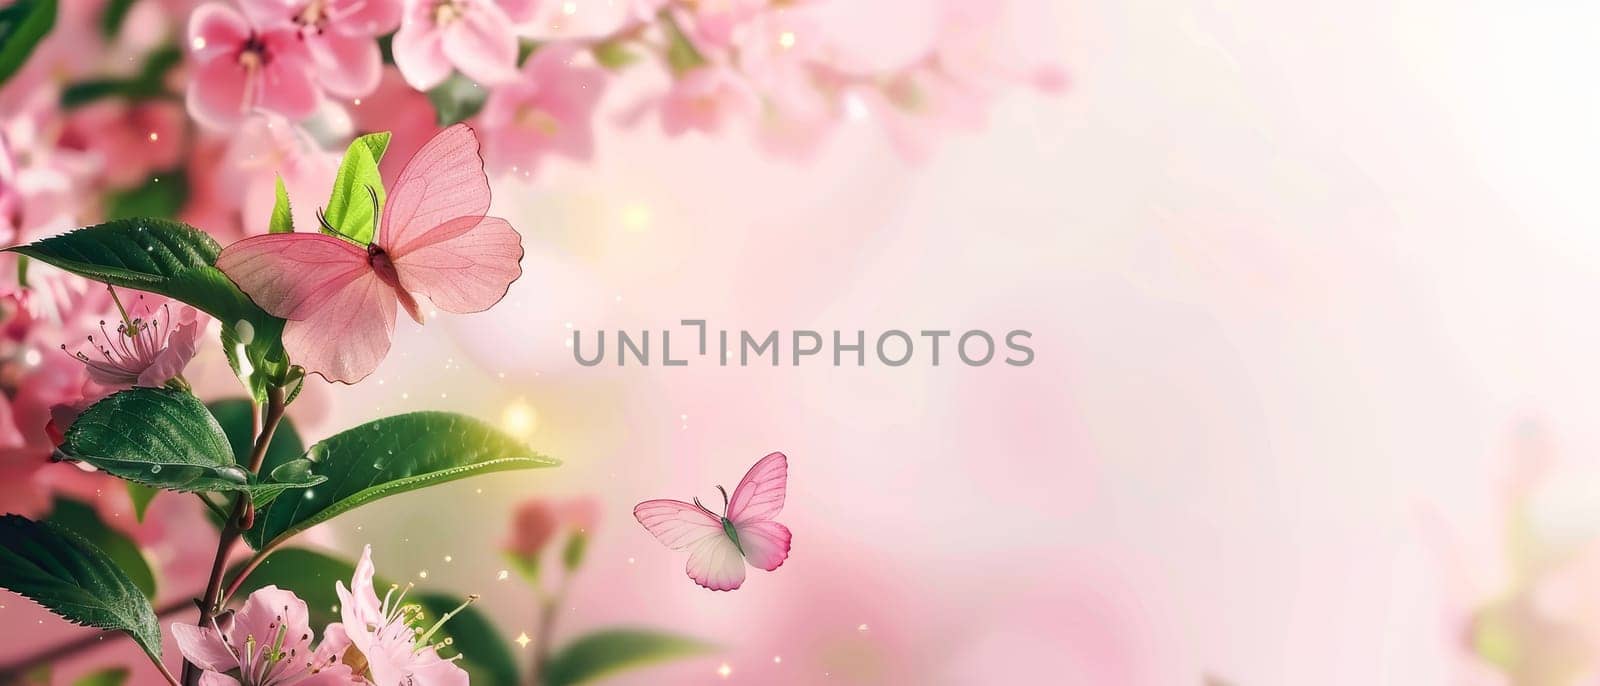 Delicate pink blossoms and fluttering butterflies welcome the whispers of spring on a backdrop of soft hues by sfinks